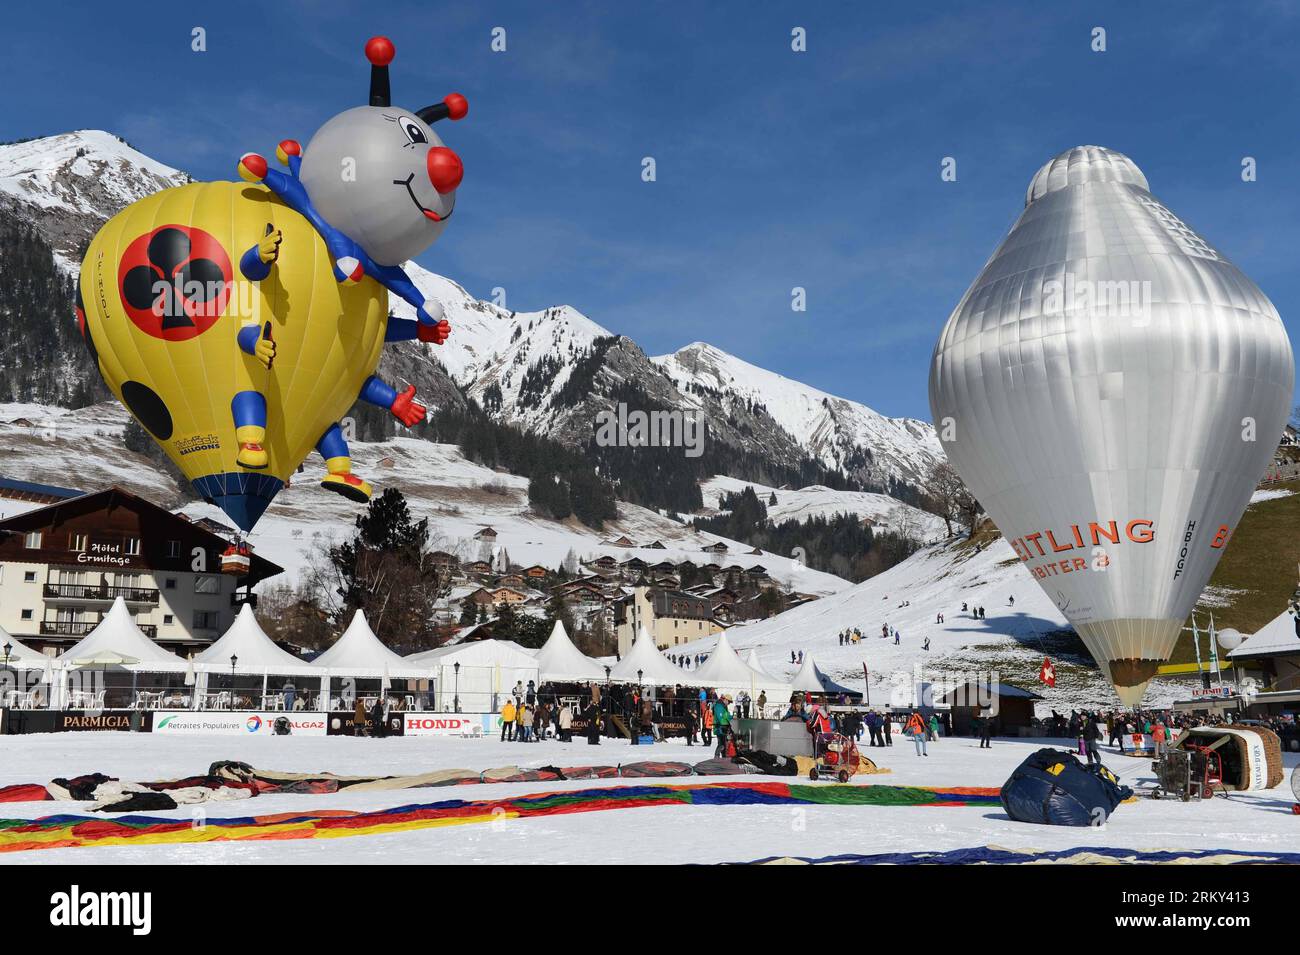 Bildnummer: 59138111  Datum: 26.01.2013  Copyright: imago/Xinhua (130126) -- CHATEAU-D OEX, Jan. 26, 2013 (Xinhua) -- Cartoon balloons take off at the 35th International Ballon Festival in Chateau-d Oex, Switzerland, Jan. 26, 2013. The 9-day ballon festival kicked off here on Saturday with the participation of over 80 balloons from 15 countries and regions. (Xinhua/Wang Siwei)(zf) SWITZERLAND-CHATEAU-D OEX-INTERNATIONAL BALLOON FESTIVAL PUBLICATIONxNOTxINxCHN Gesesllchaft Heisluftballon Ballon Heissluftballonfestival Ballonfestival xdp x0x premiumd 2013 quer      59138111 Date 26 01 2013 Copyr Stock Photo